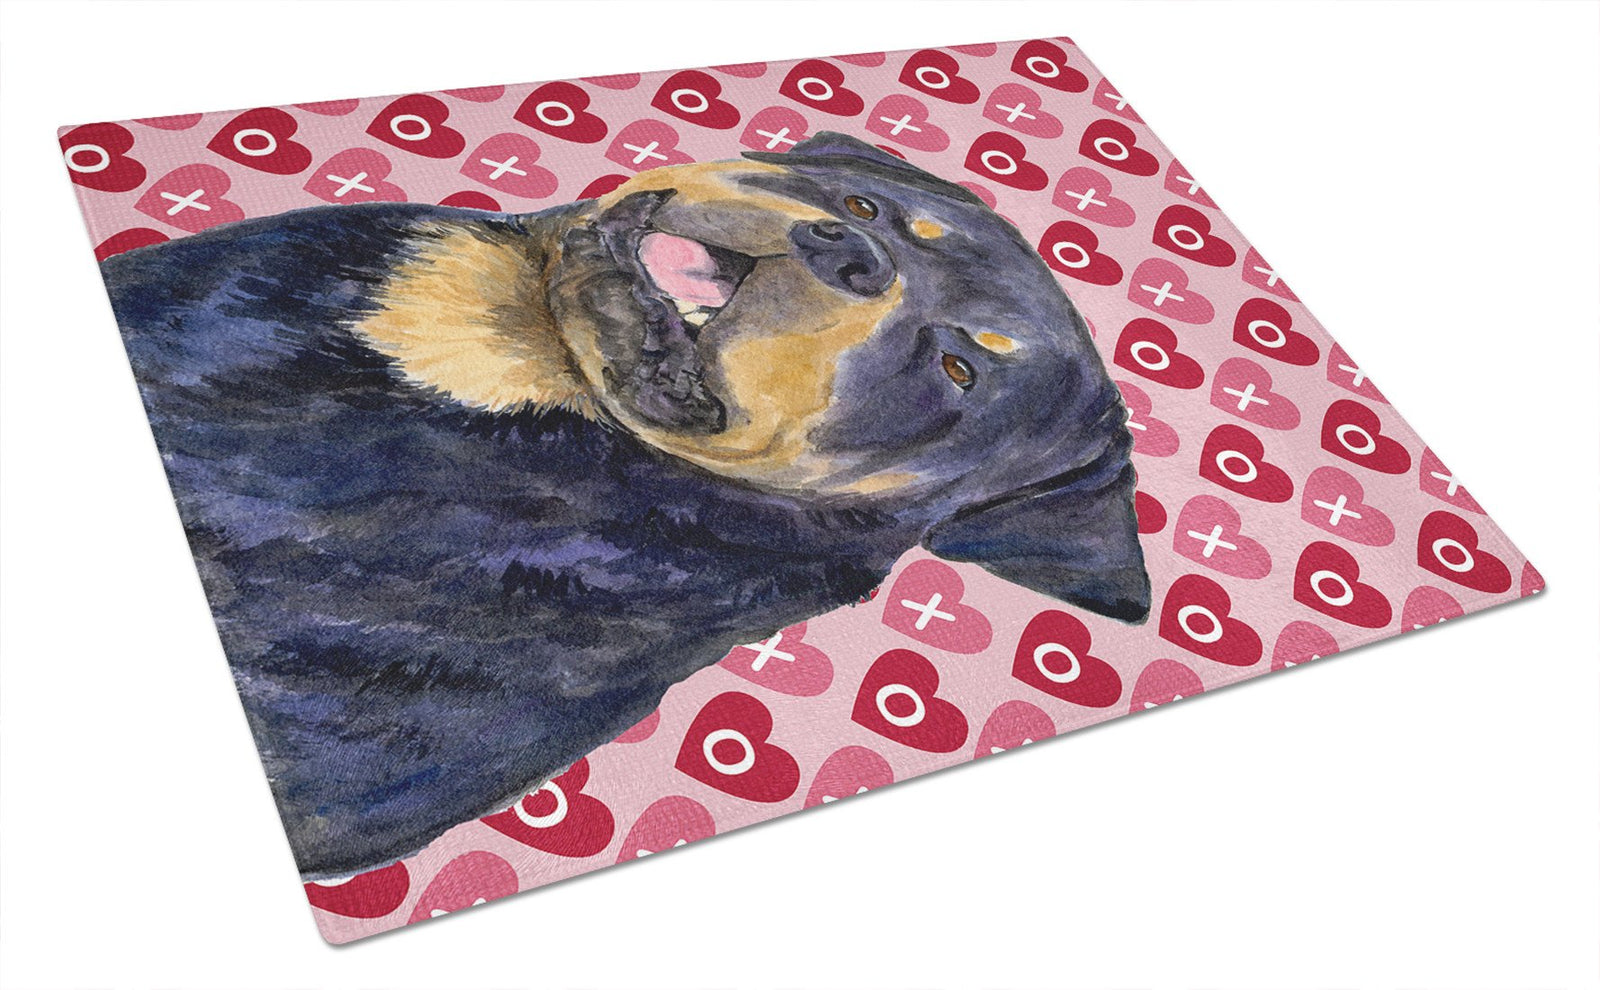 Rottweiler Hearts Love and Valentine's Day Portrait Glass Cutting Board Large by Caroline's Treasures